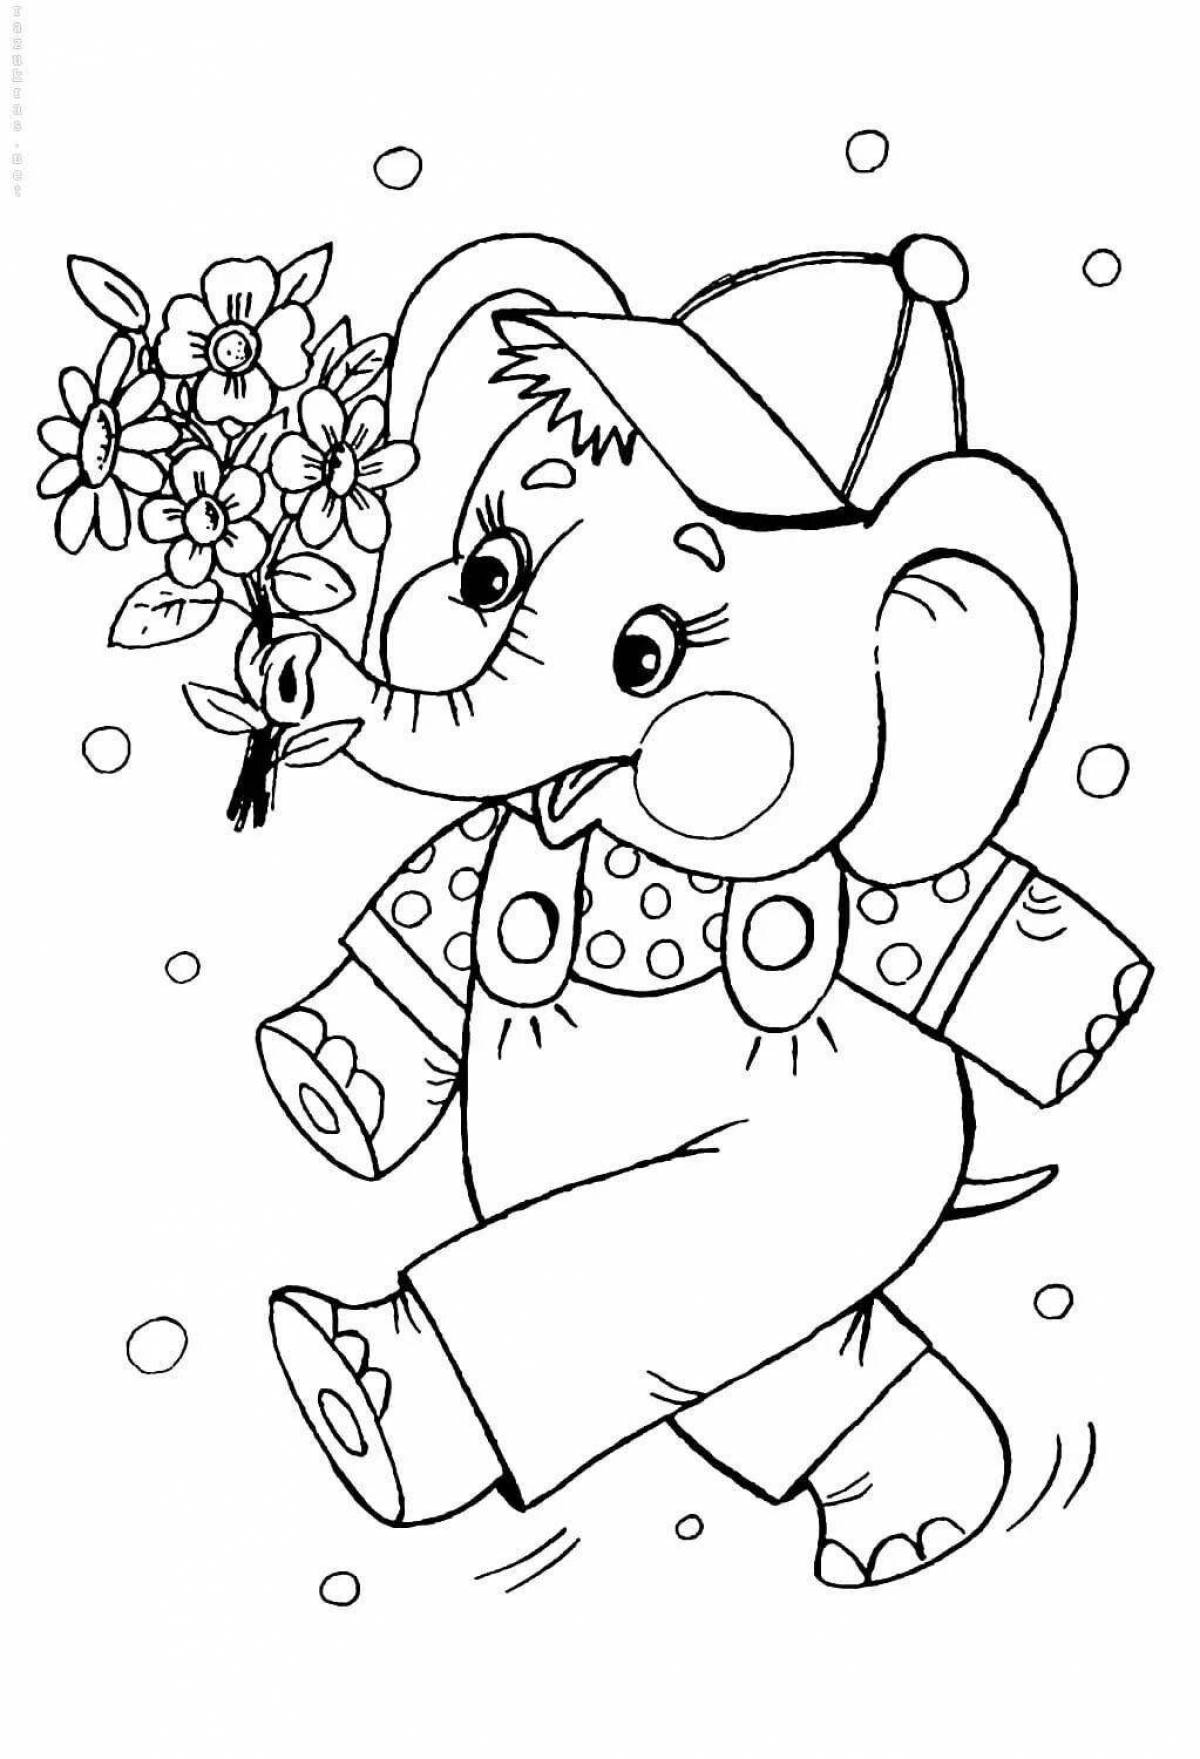 Fun coloring book for 6-8 year olds